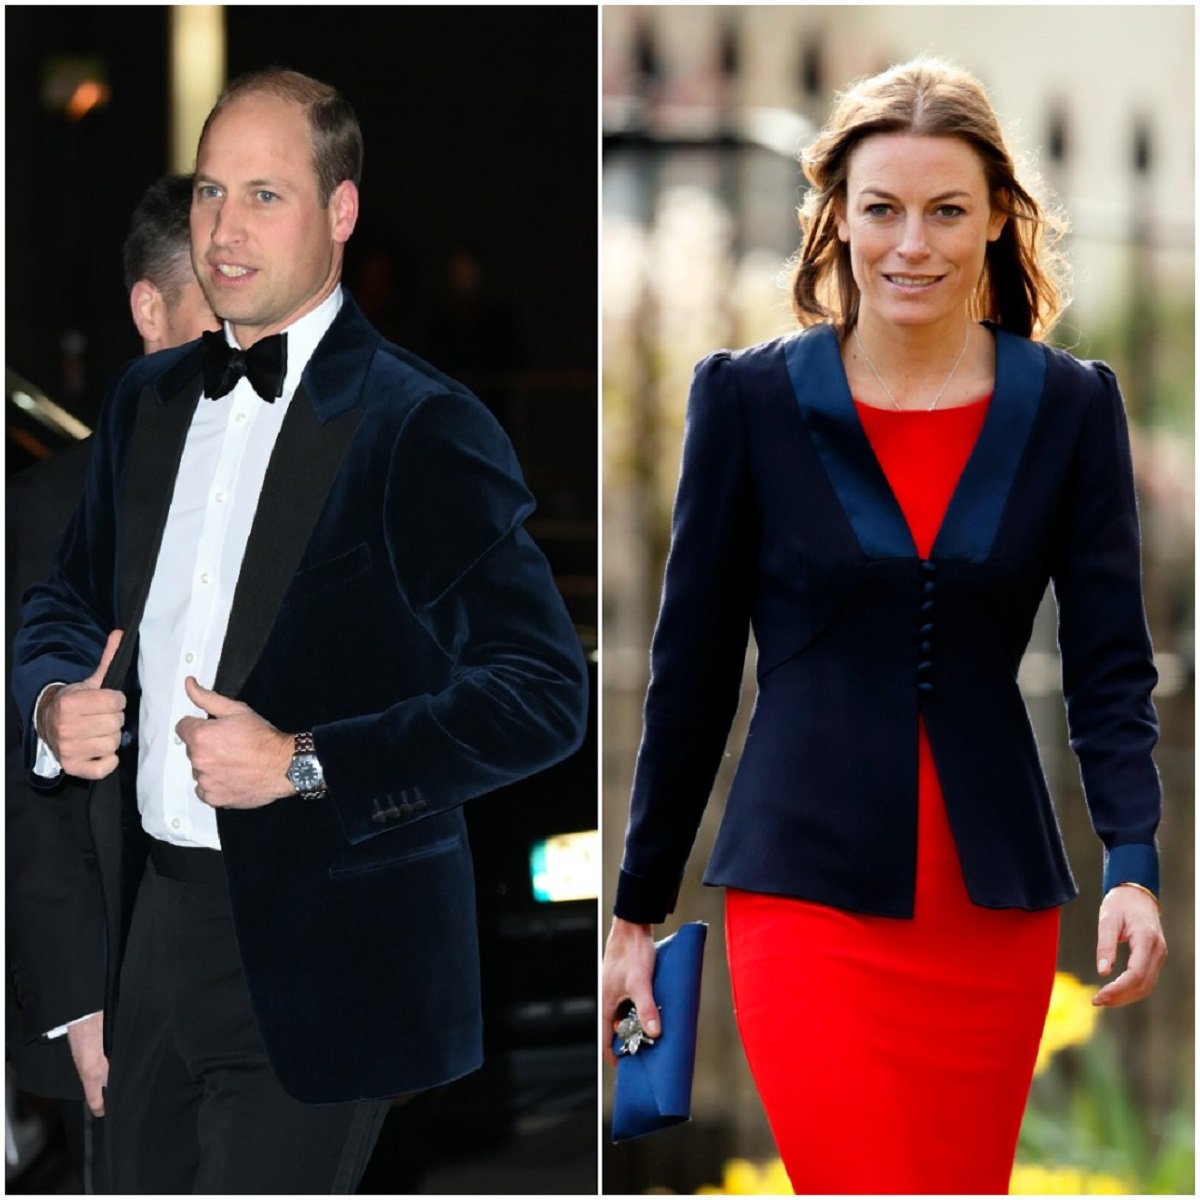 (L): Prince William Dressed in a tuxedo for the Royal Variety Performance, (R): Jecca Craig arriving to a friend's wedding in Chippenham, England